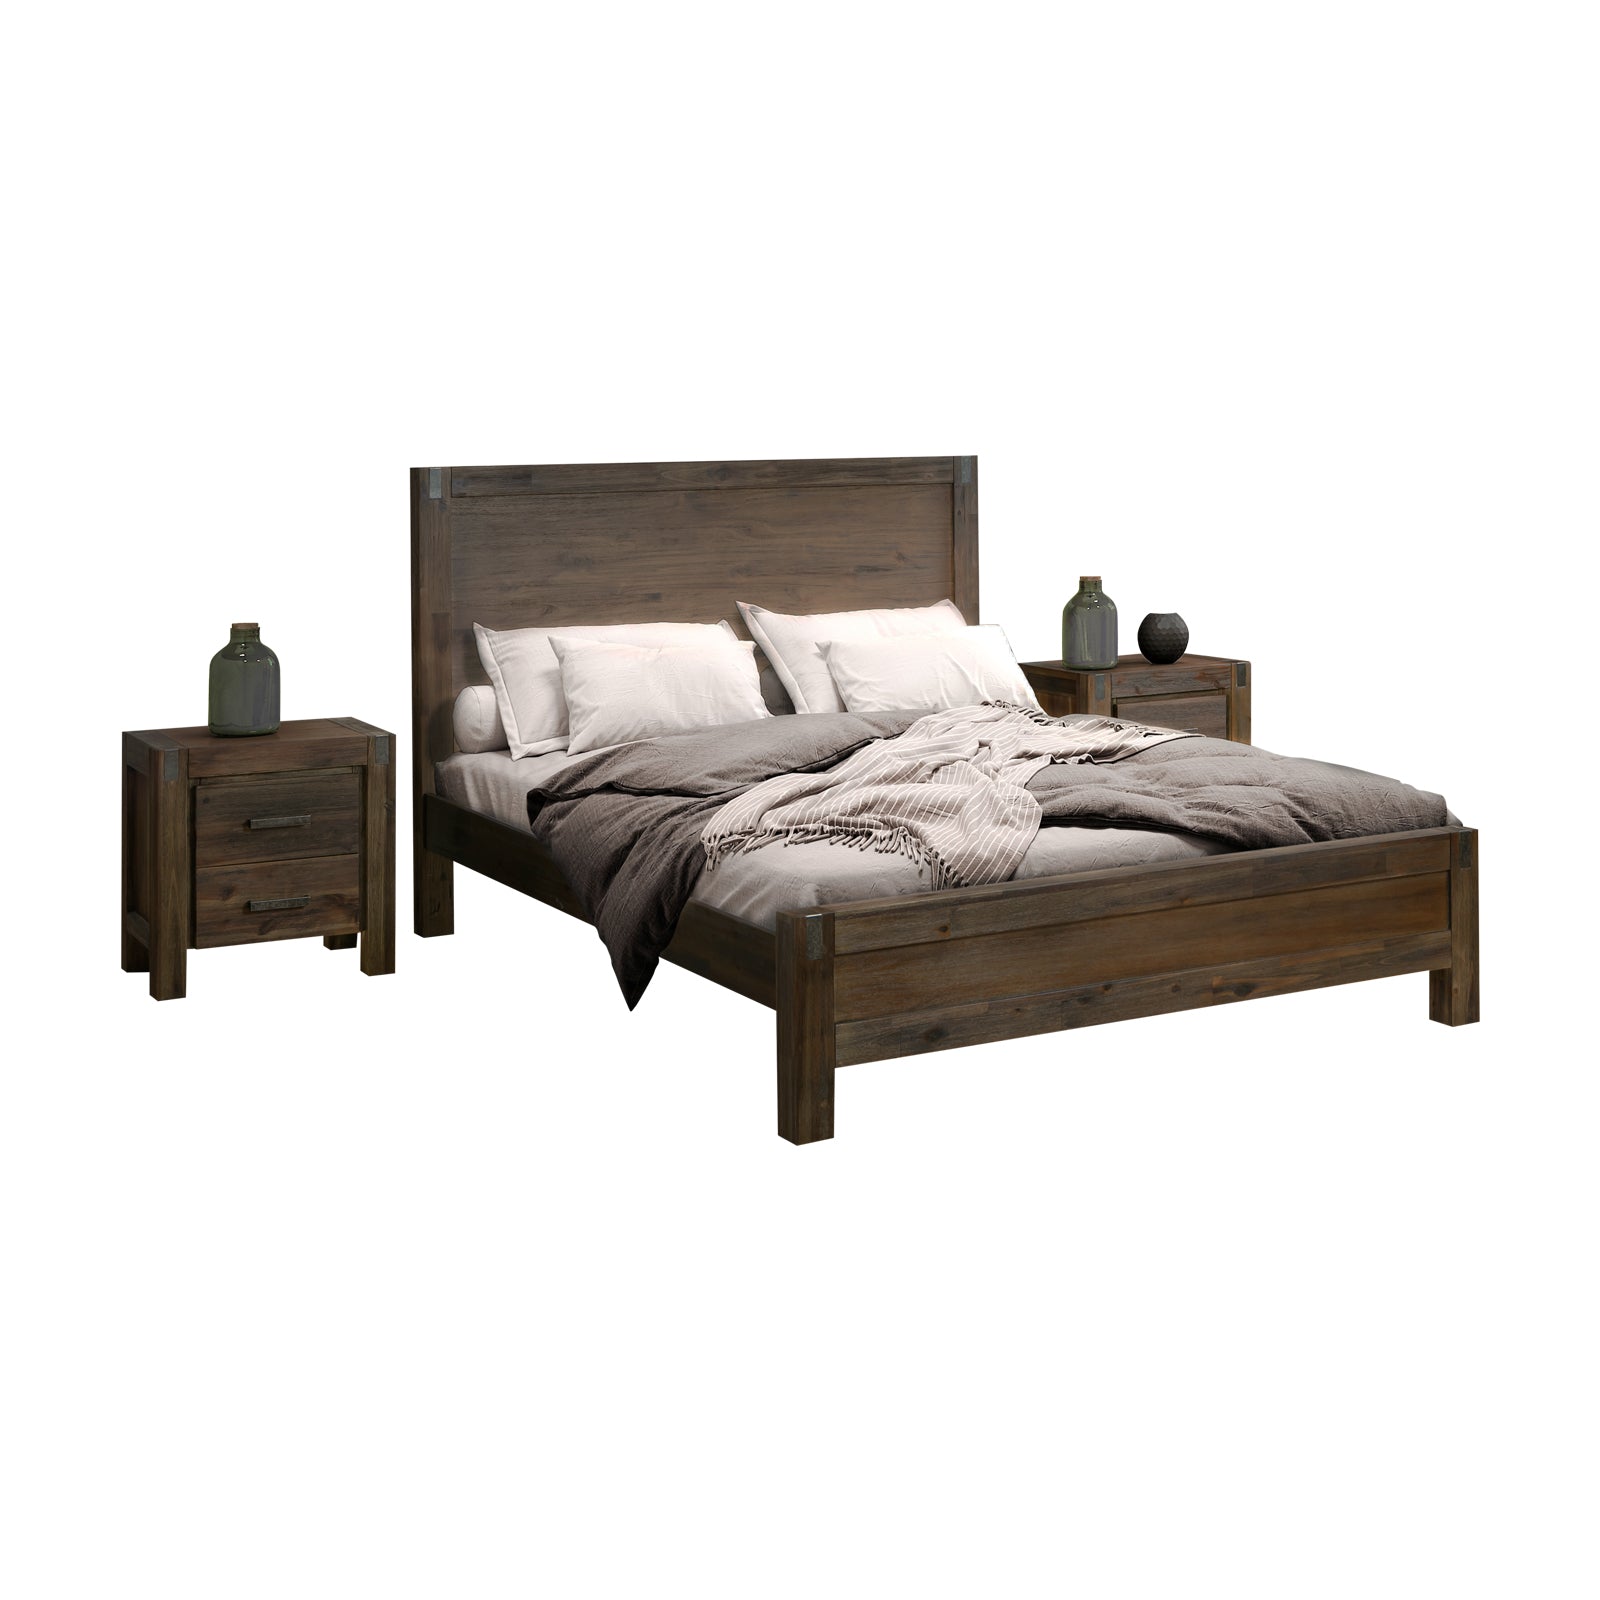 5 Pieces Bedroom Suite in Solid Wood Veneered Acacia Construction Timber Slat Double Size Chocolate Colour Bed, Bedside Table, Tallboy & Dresser - SILBERSHELL